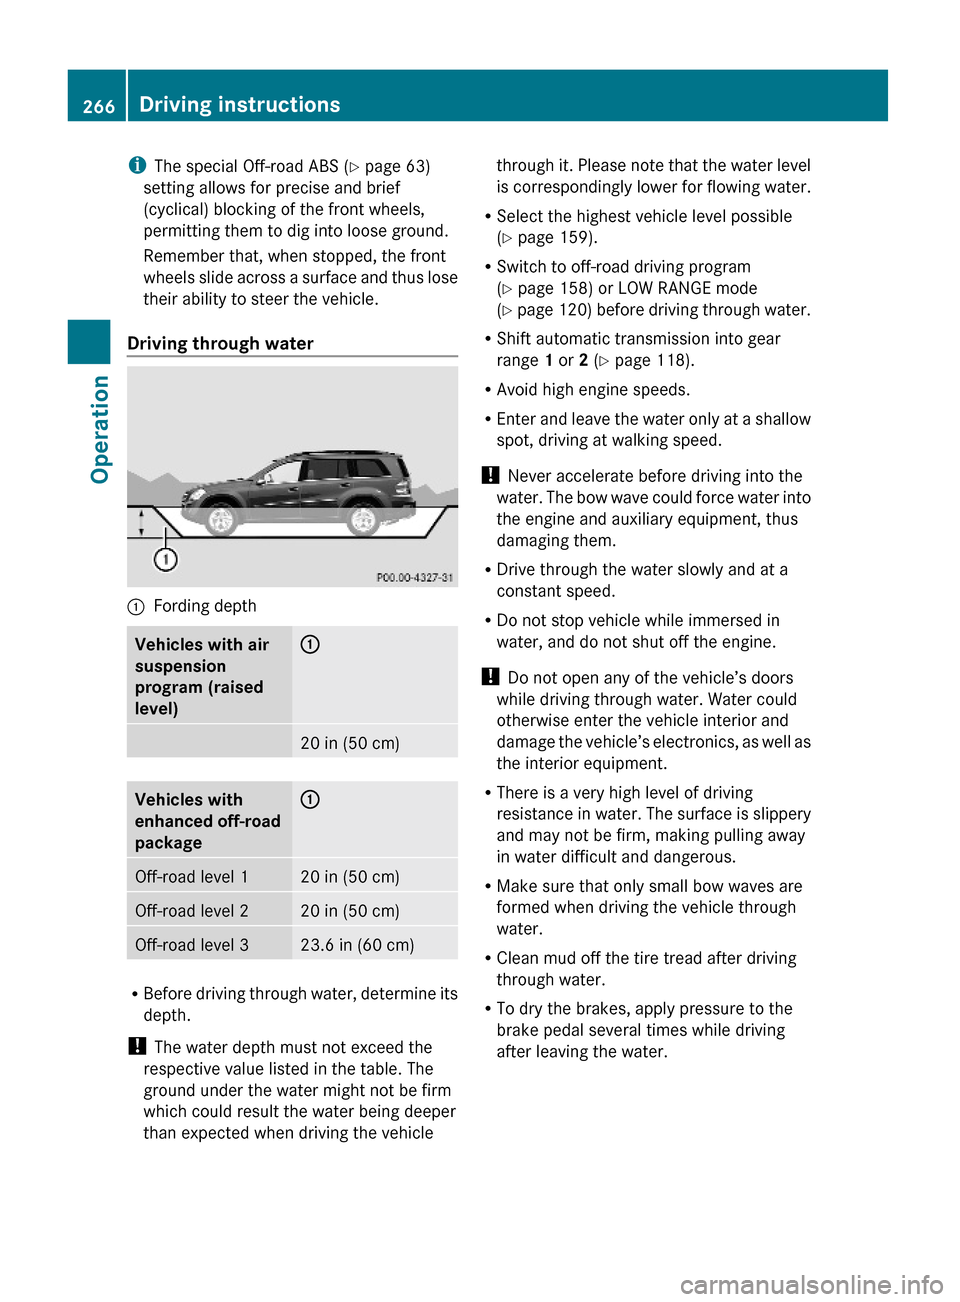 MERCEDES-BENZ GL550 2010 X164 Owners Manual iThe special Off-road ABS (Y page 63)
setting allows for precise and brief
(cyclical) blocking of the front wheels,
permitting them to dig into loose ground.
Remember that, when stopped, the front
whe